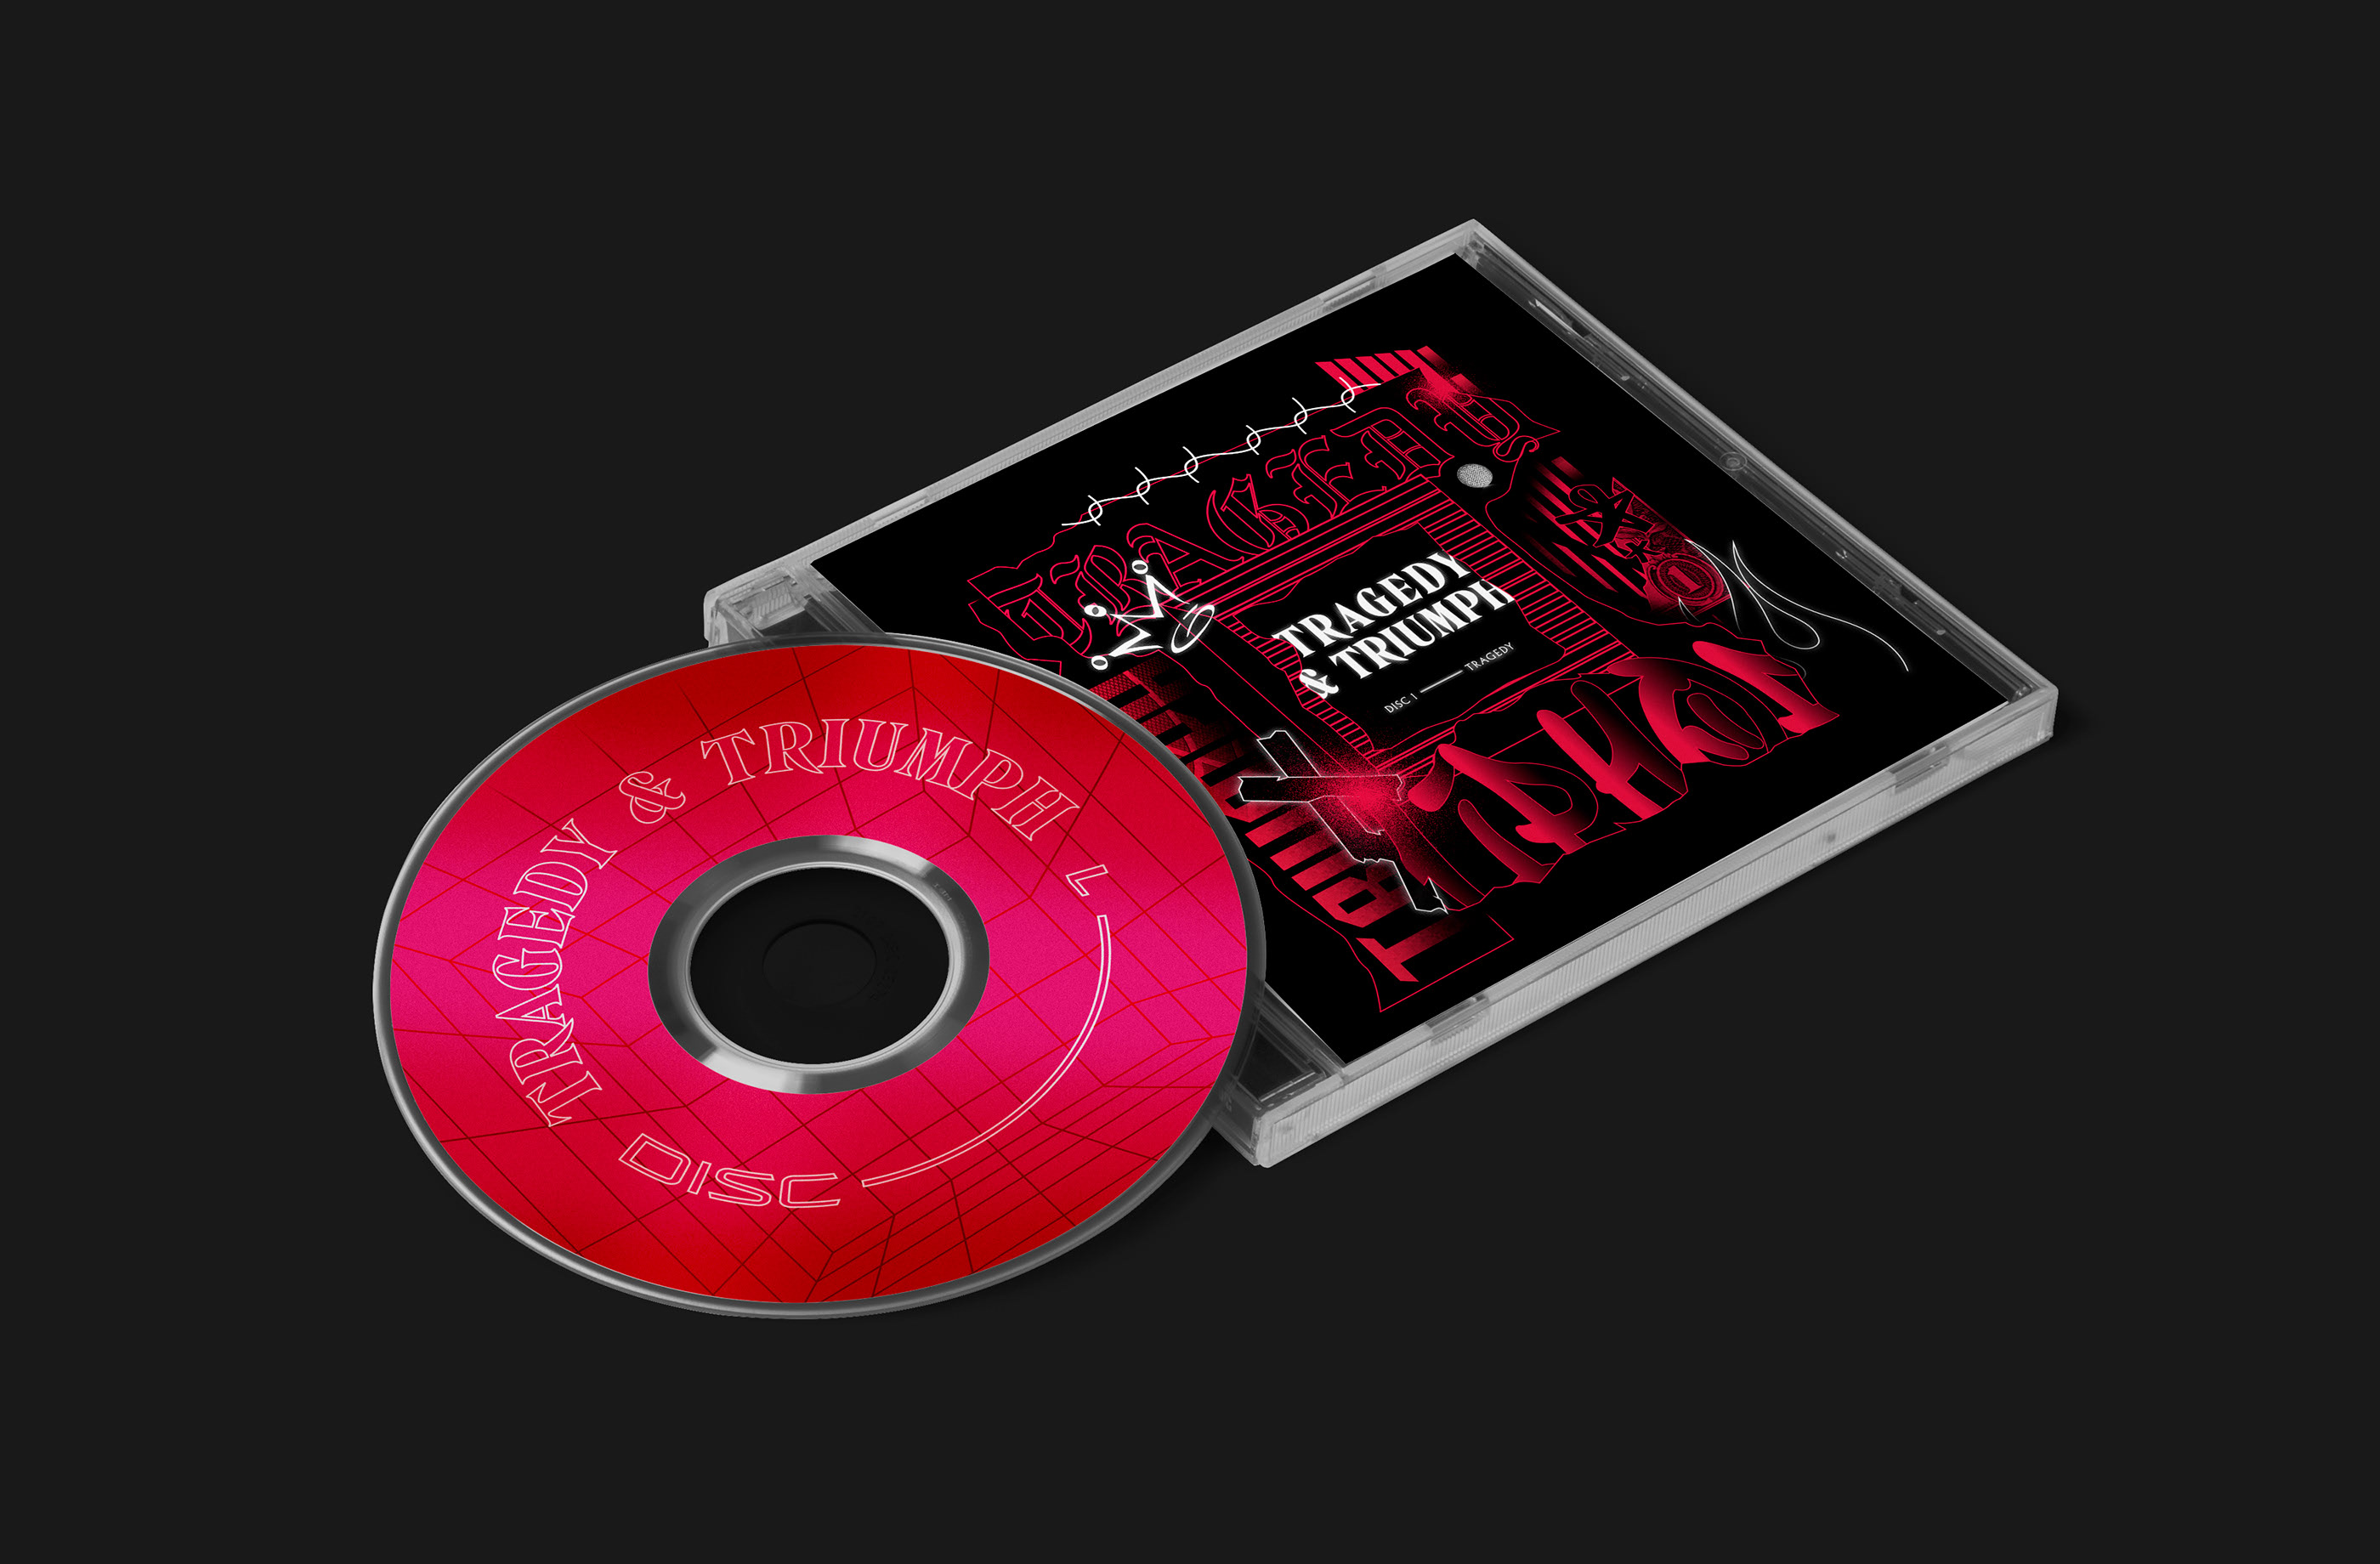 Tragedy & Triumph – 2 Part Mixtape Deluxe Packaging on Behance